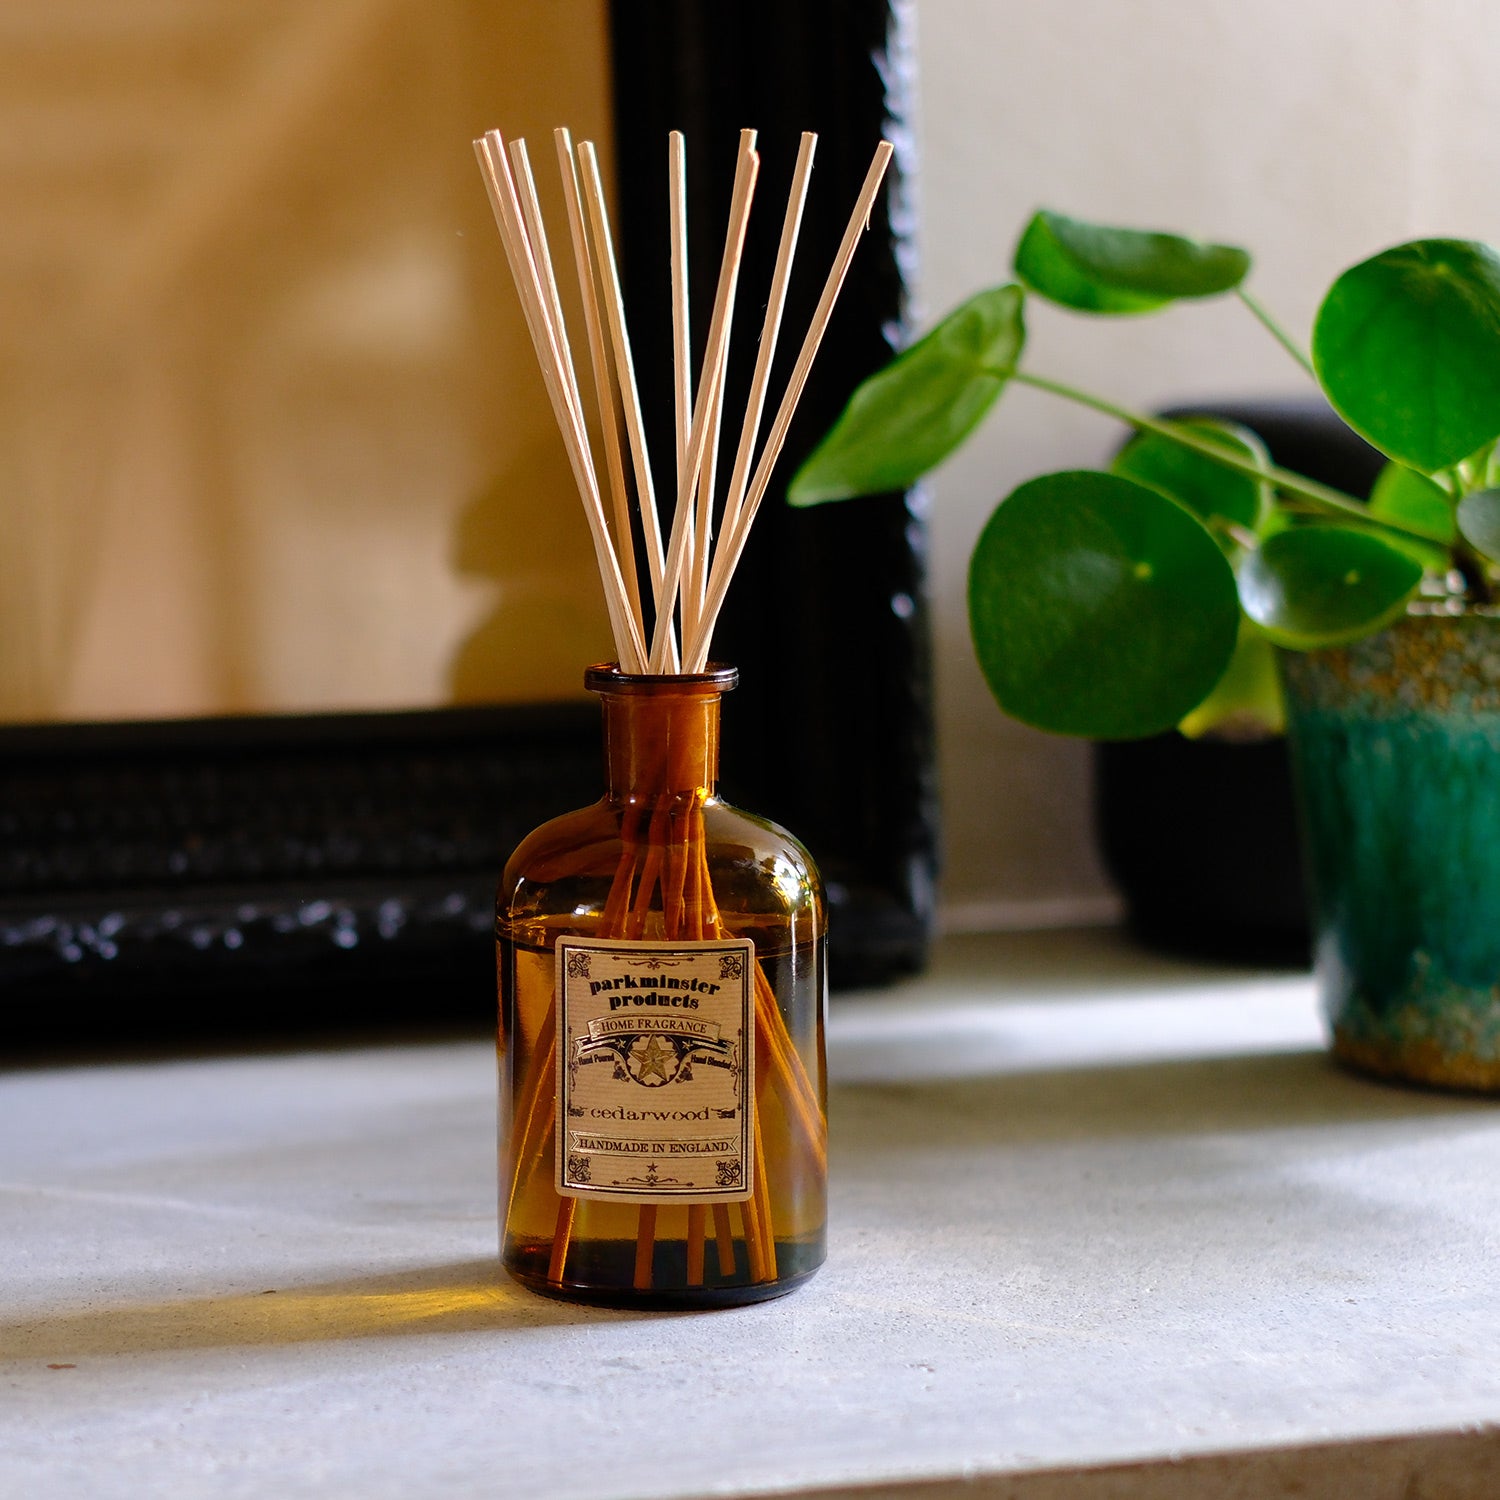 Parkminster Home Fragrance Cedarwood Reed Diffuser, 200ml bottle from the Apothecary Collection, crafted by hand in Cornwall